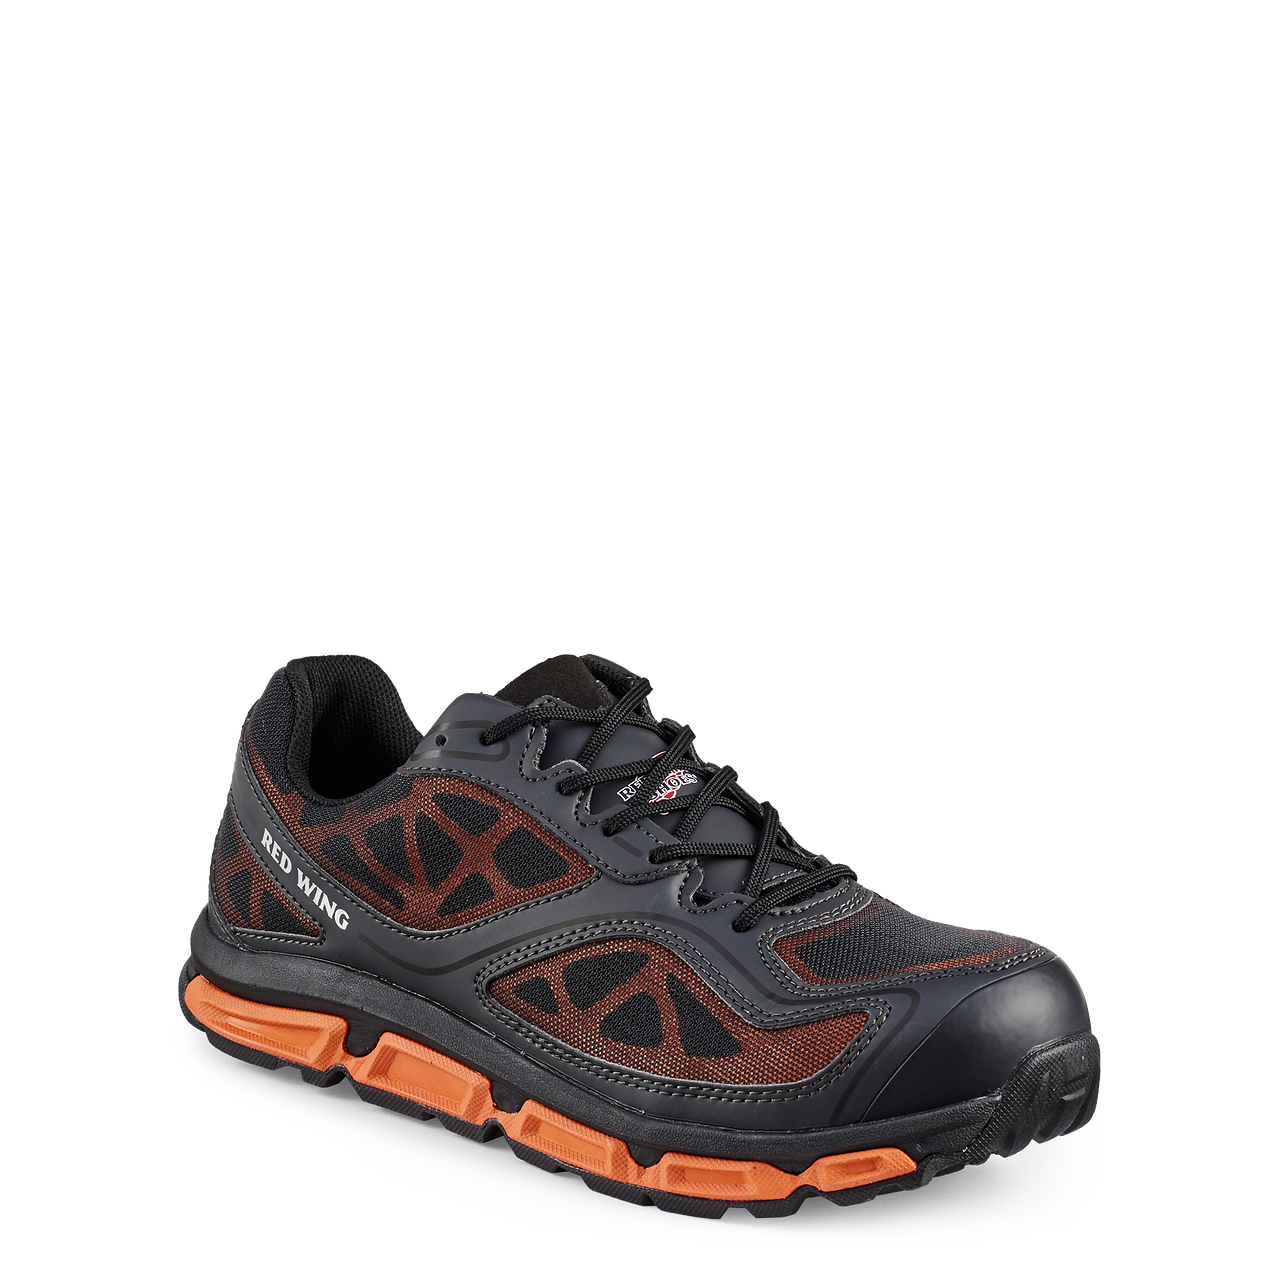 Red Wing 6338 Safety Toe Athletic Work Shoe